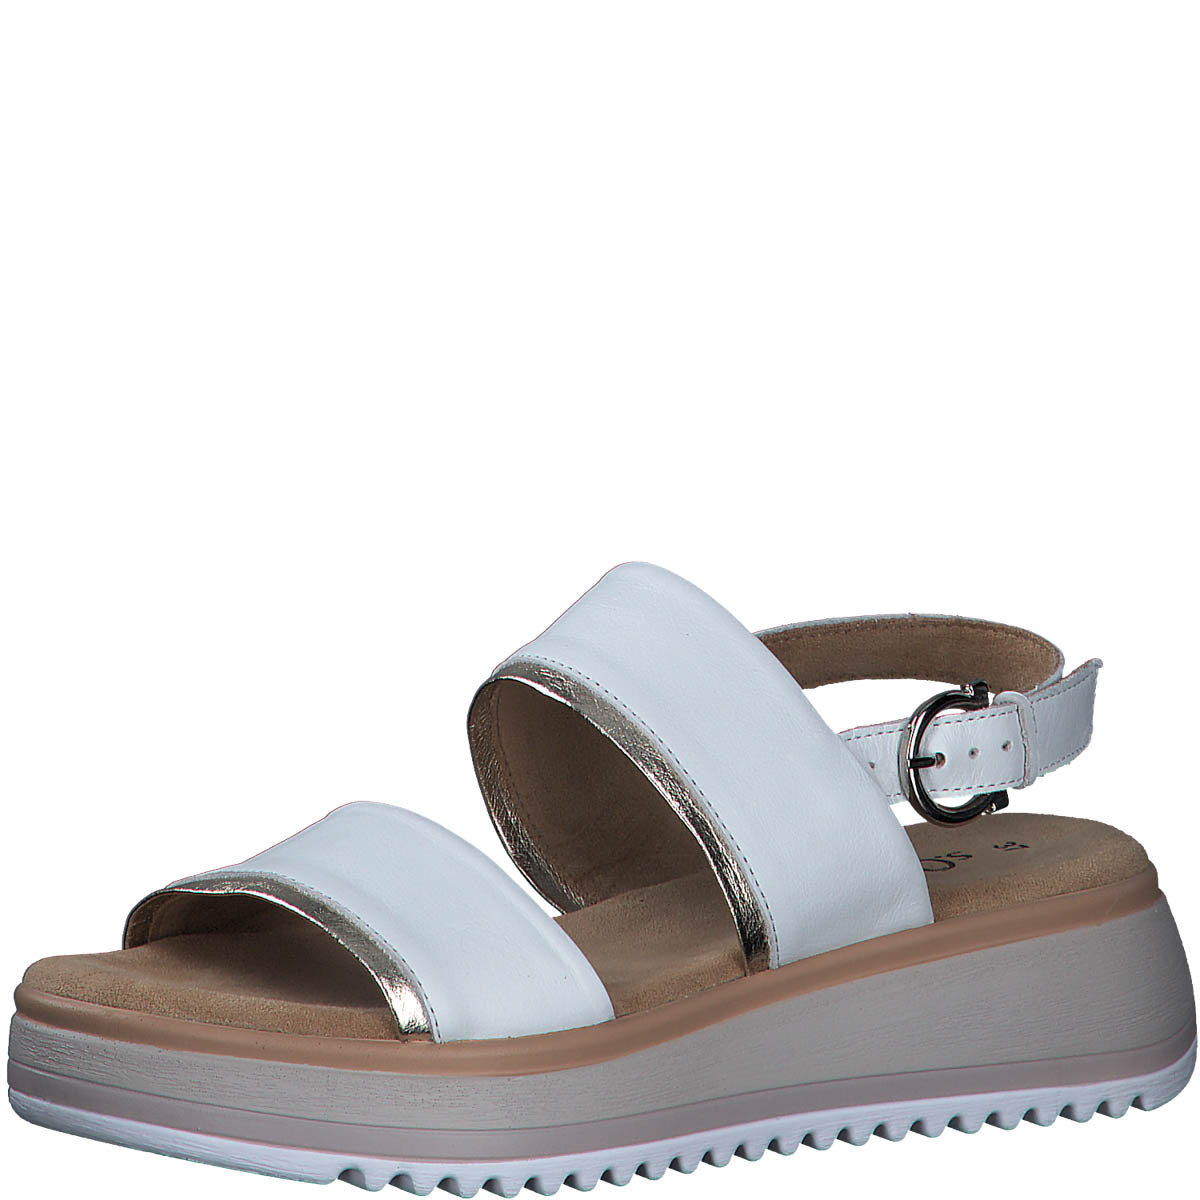     Front view of S.Oliver Summer Sandals with white leather and gold-touched straps.